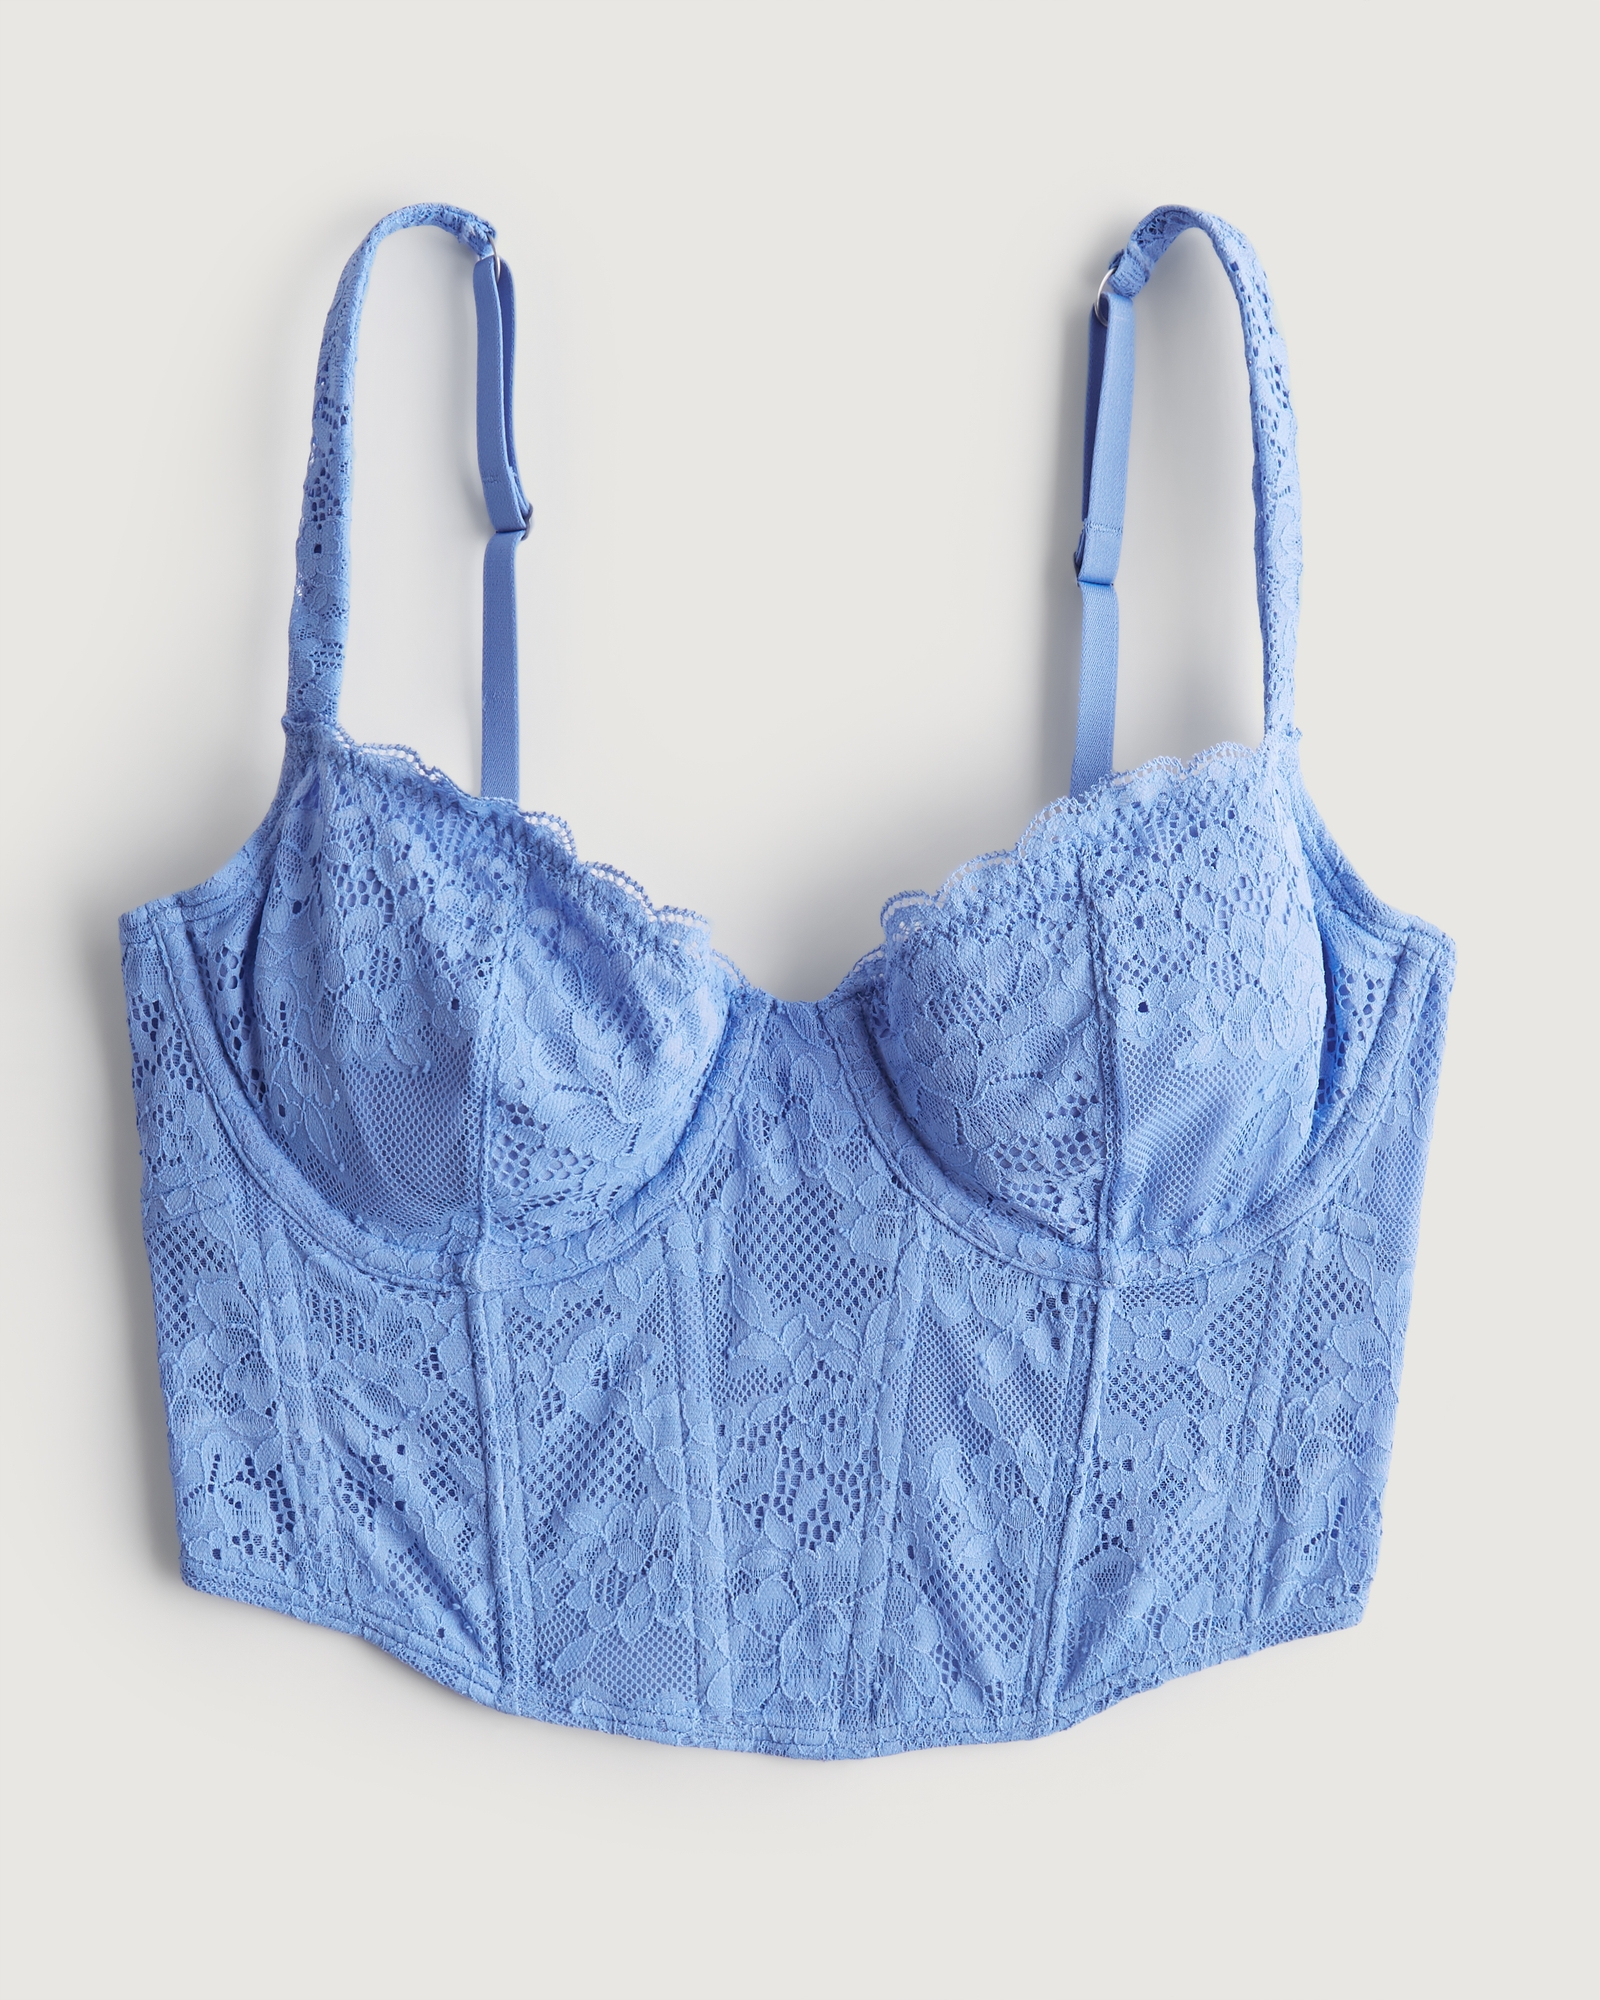 Gilly Hicks Light Blue Lace Bustier Bralette Top Size M - $19 - From